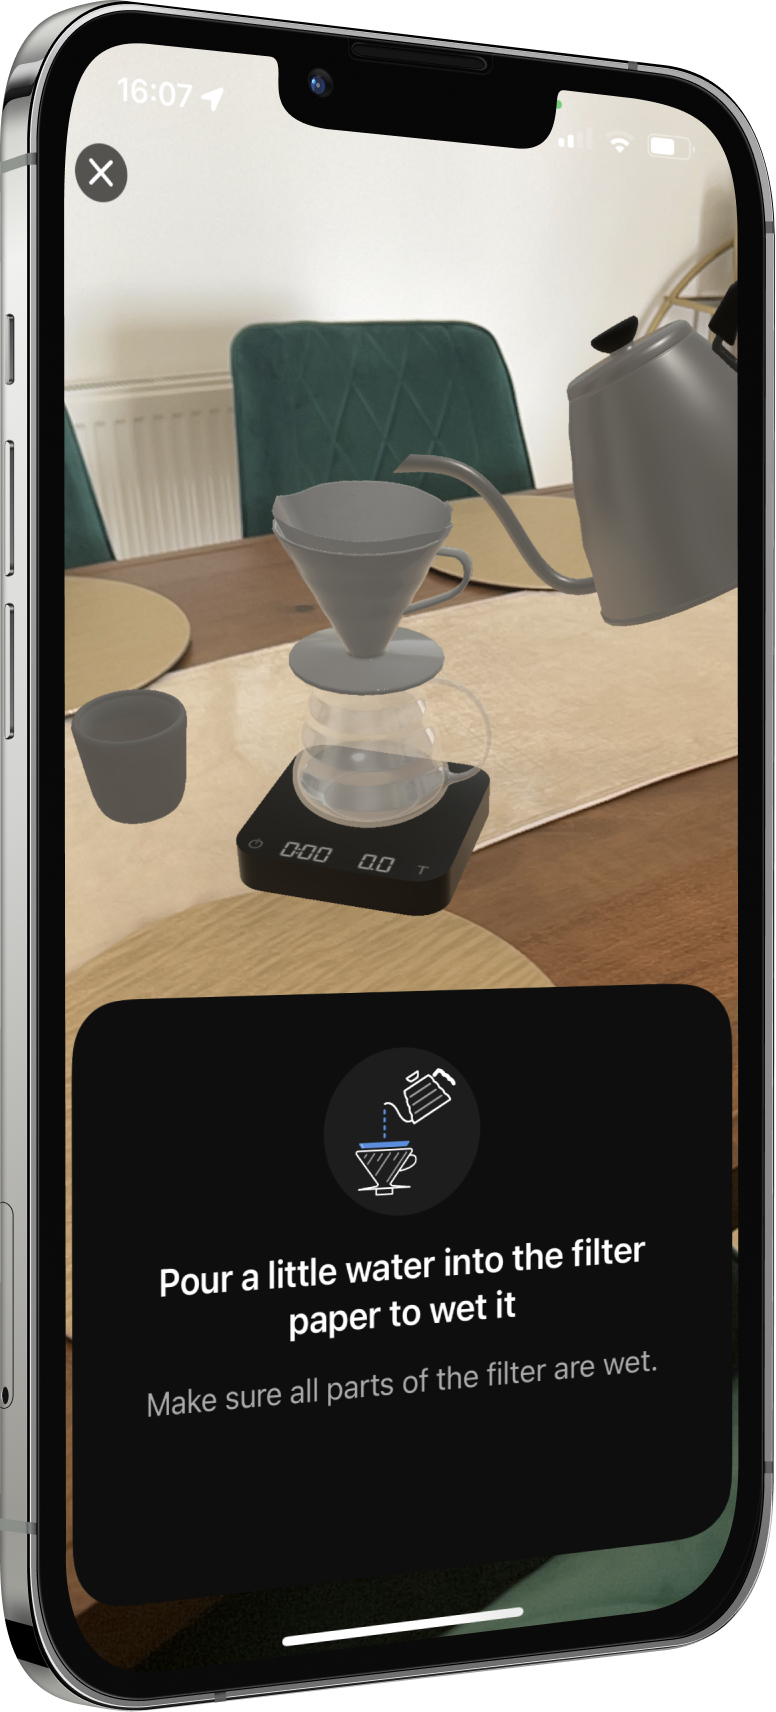 An image of the phone showing the Filtru Augmented Reality tutorial screen